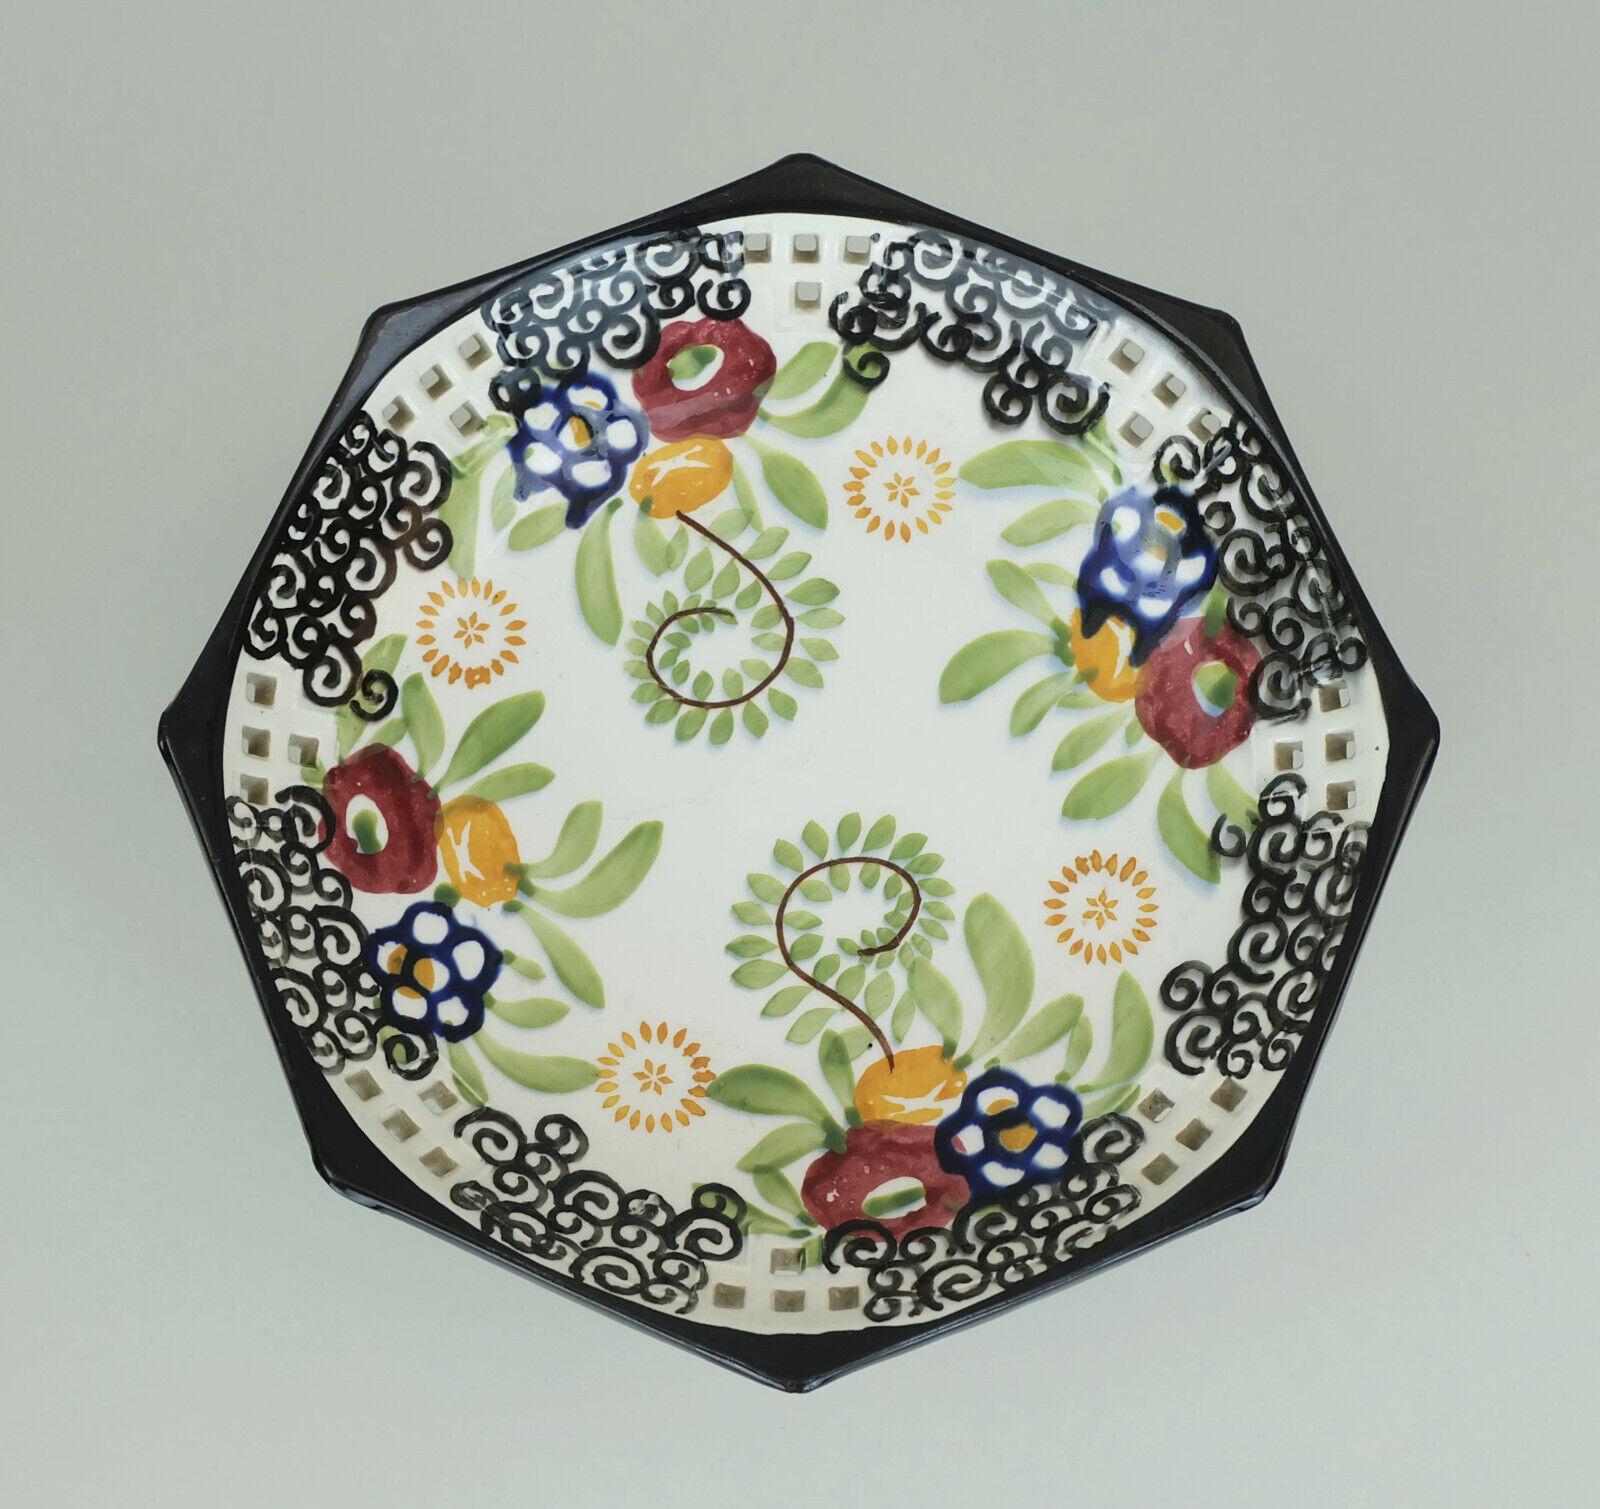 octagonal art deco BOWL footed bowl schramberg majolika 1920s hand-painted decor For Sale 3